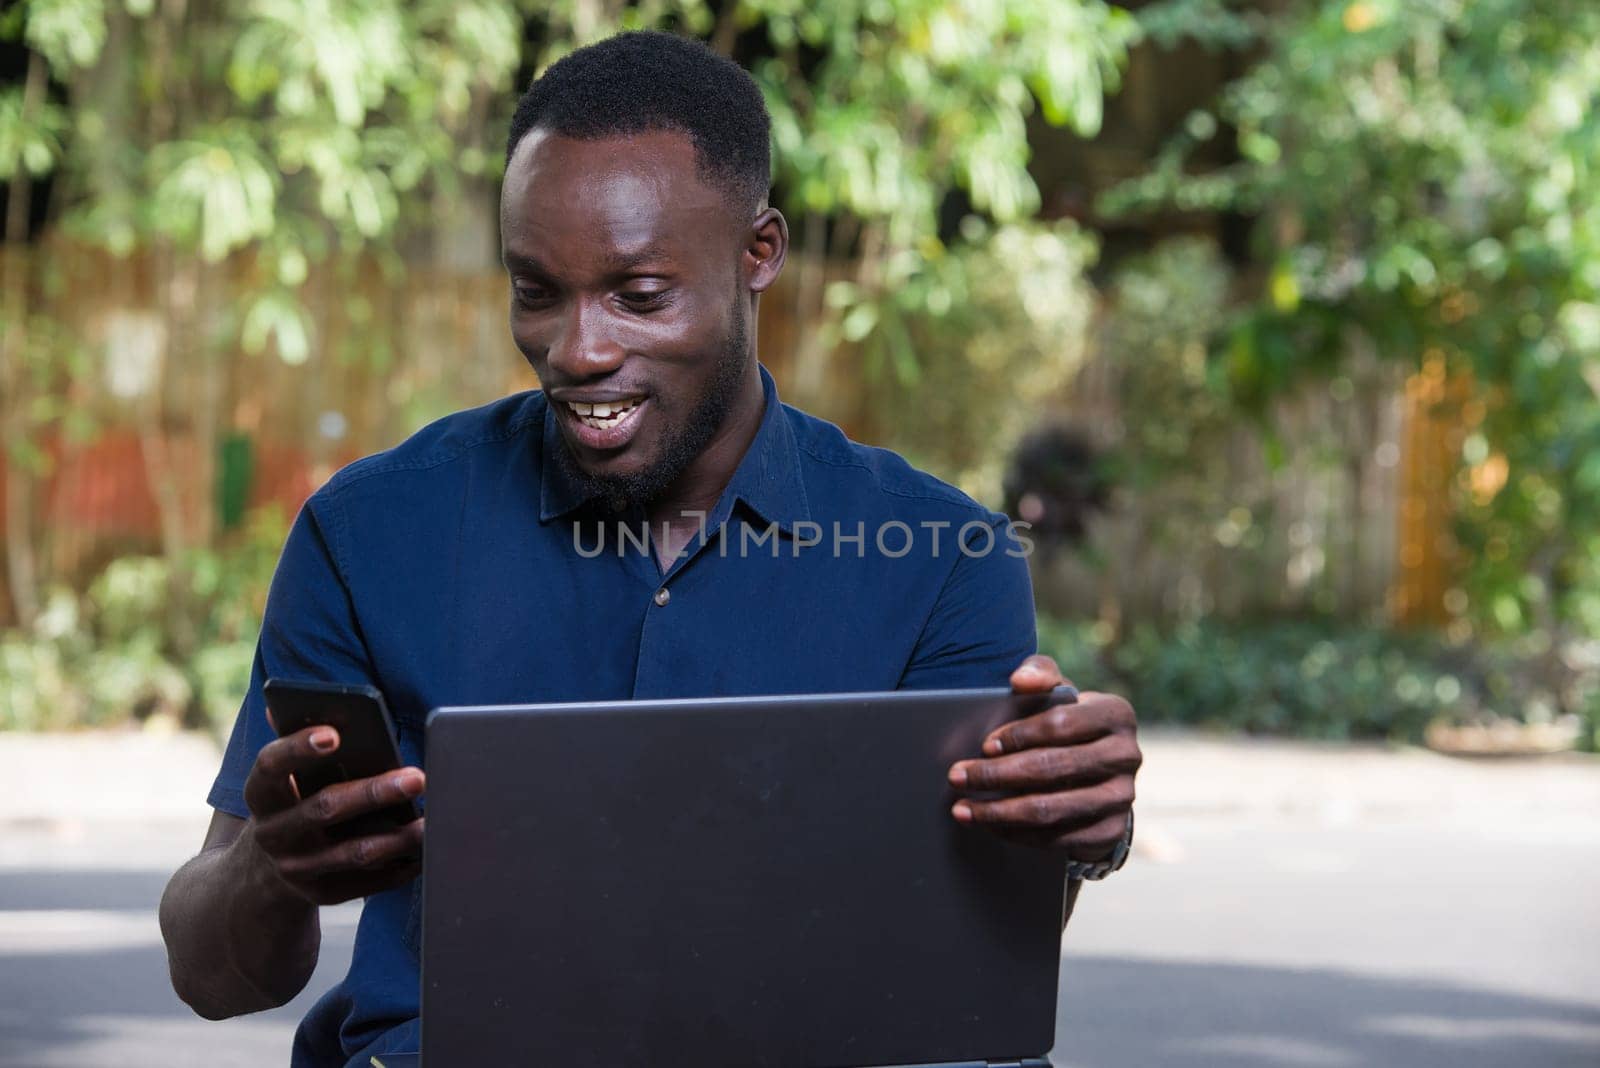 young man sitting outdoors with laptop watching mobile phone while smiling.